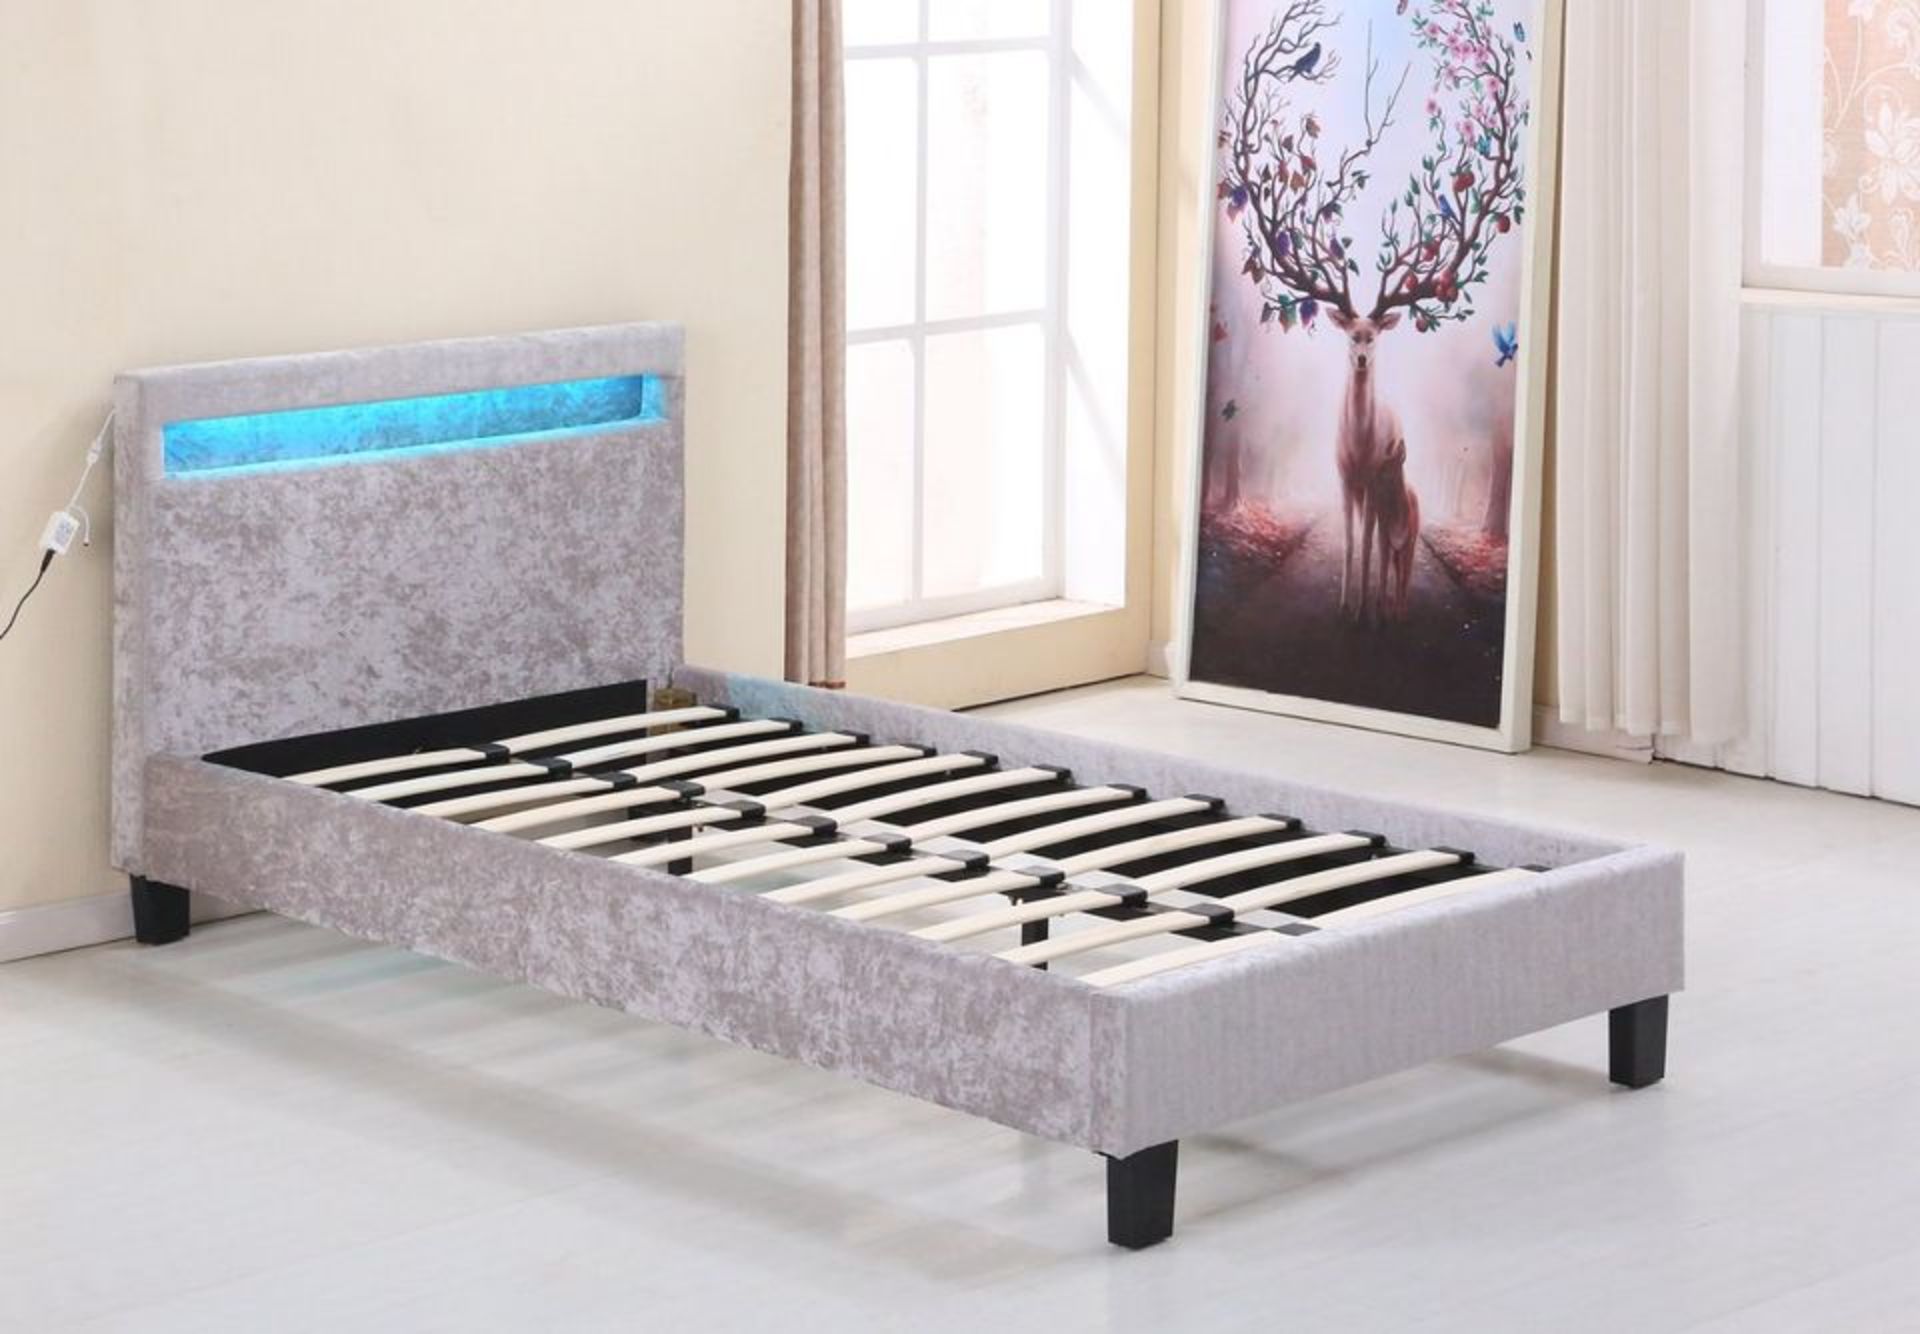 COOL SINGLE LED COLOUR CHANGING BED WITH REMOTE BRAND NEW BOXED - SILVER CRUSHED VELVET